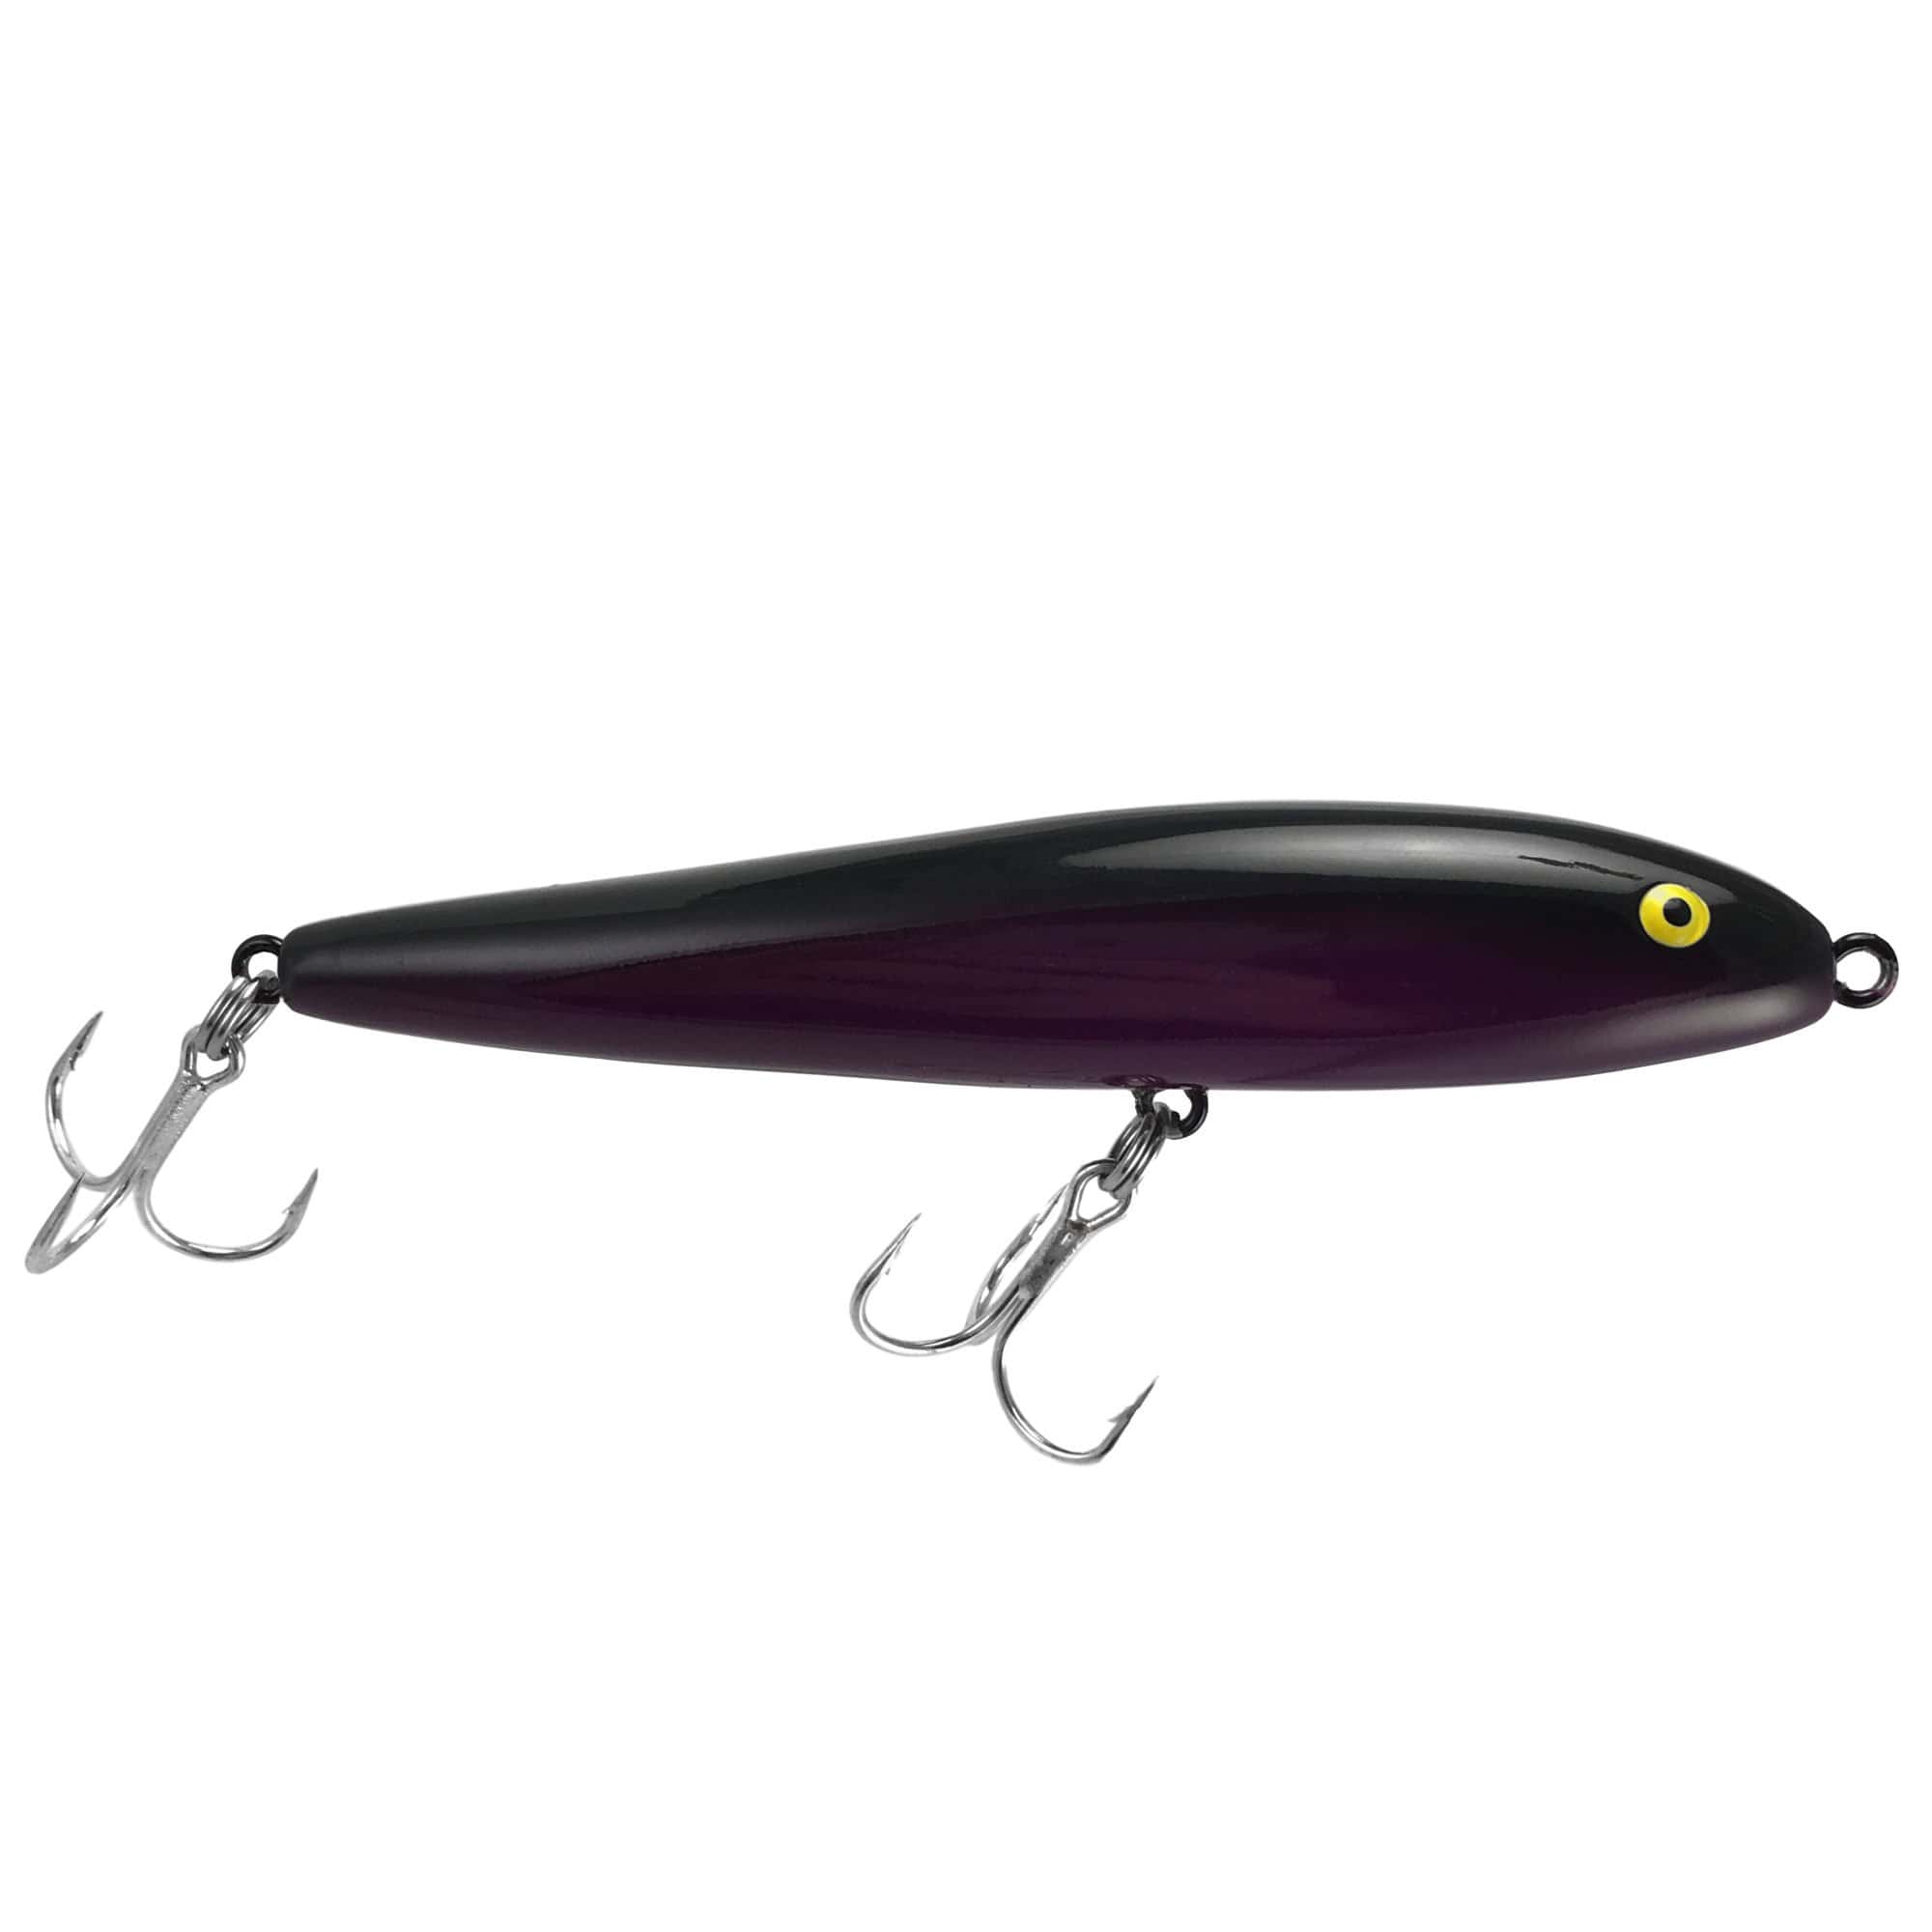 HR Tackle Fishing Lures Fishing Lures & Baits 